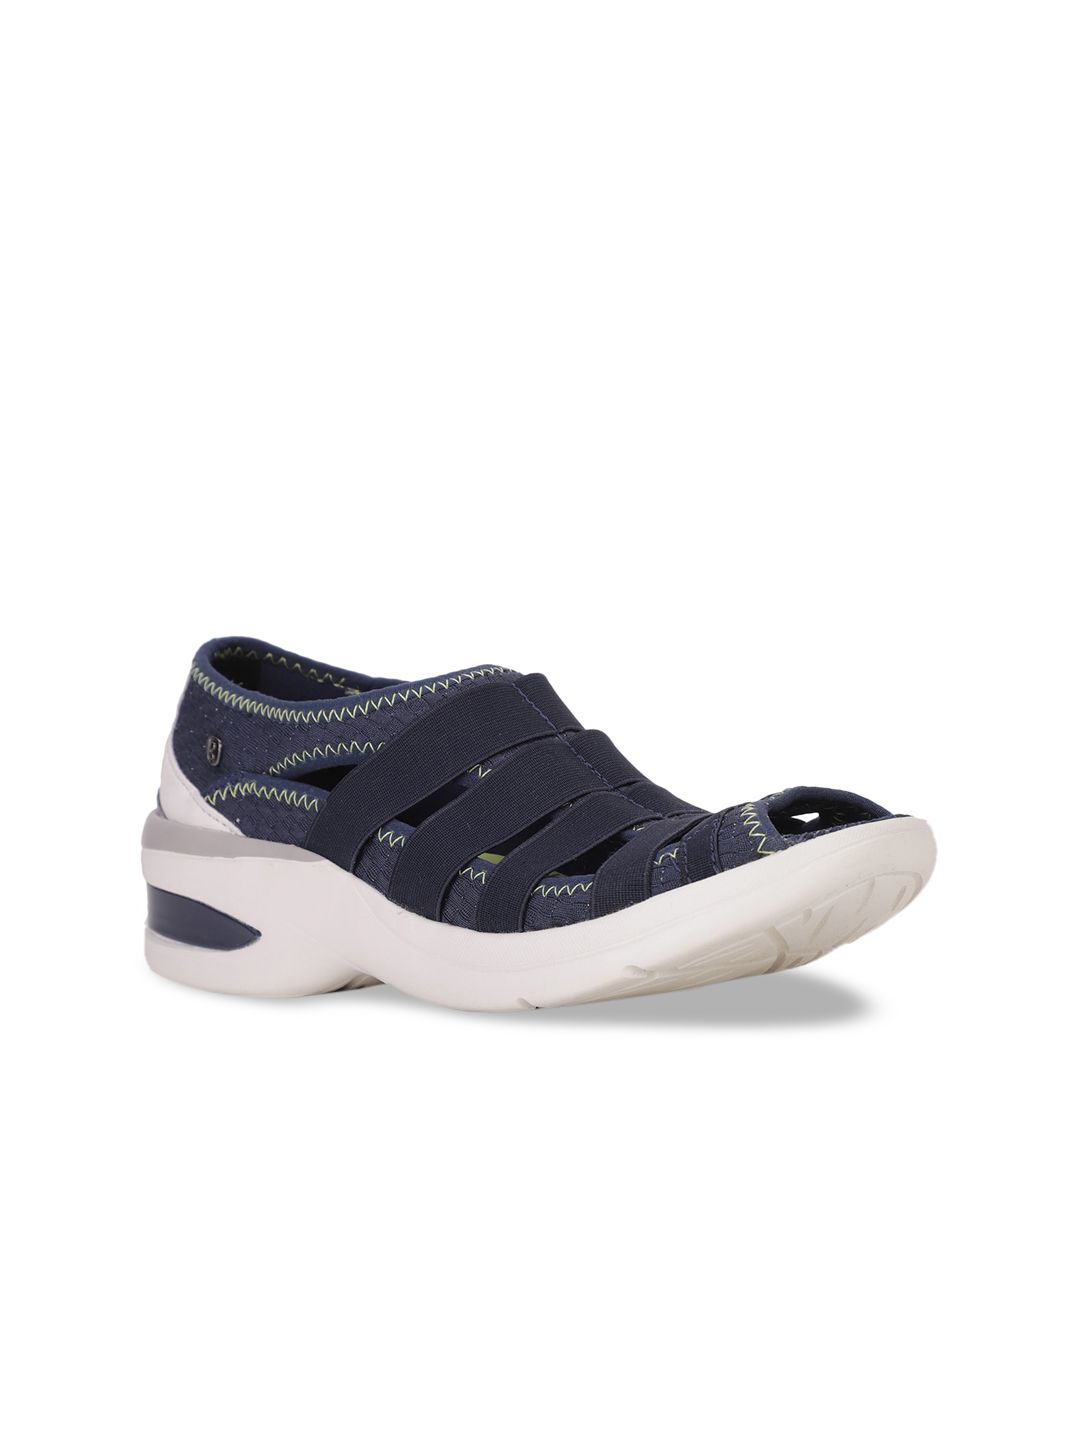 Naturalizer Women Blue Colourblocked Patent Leather Slip-On Sneakers Price in India